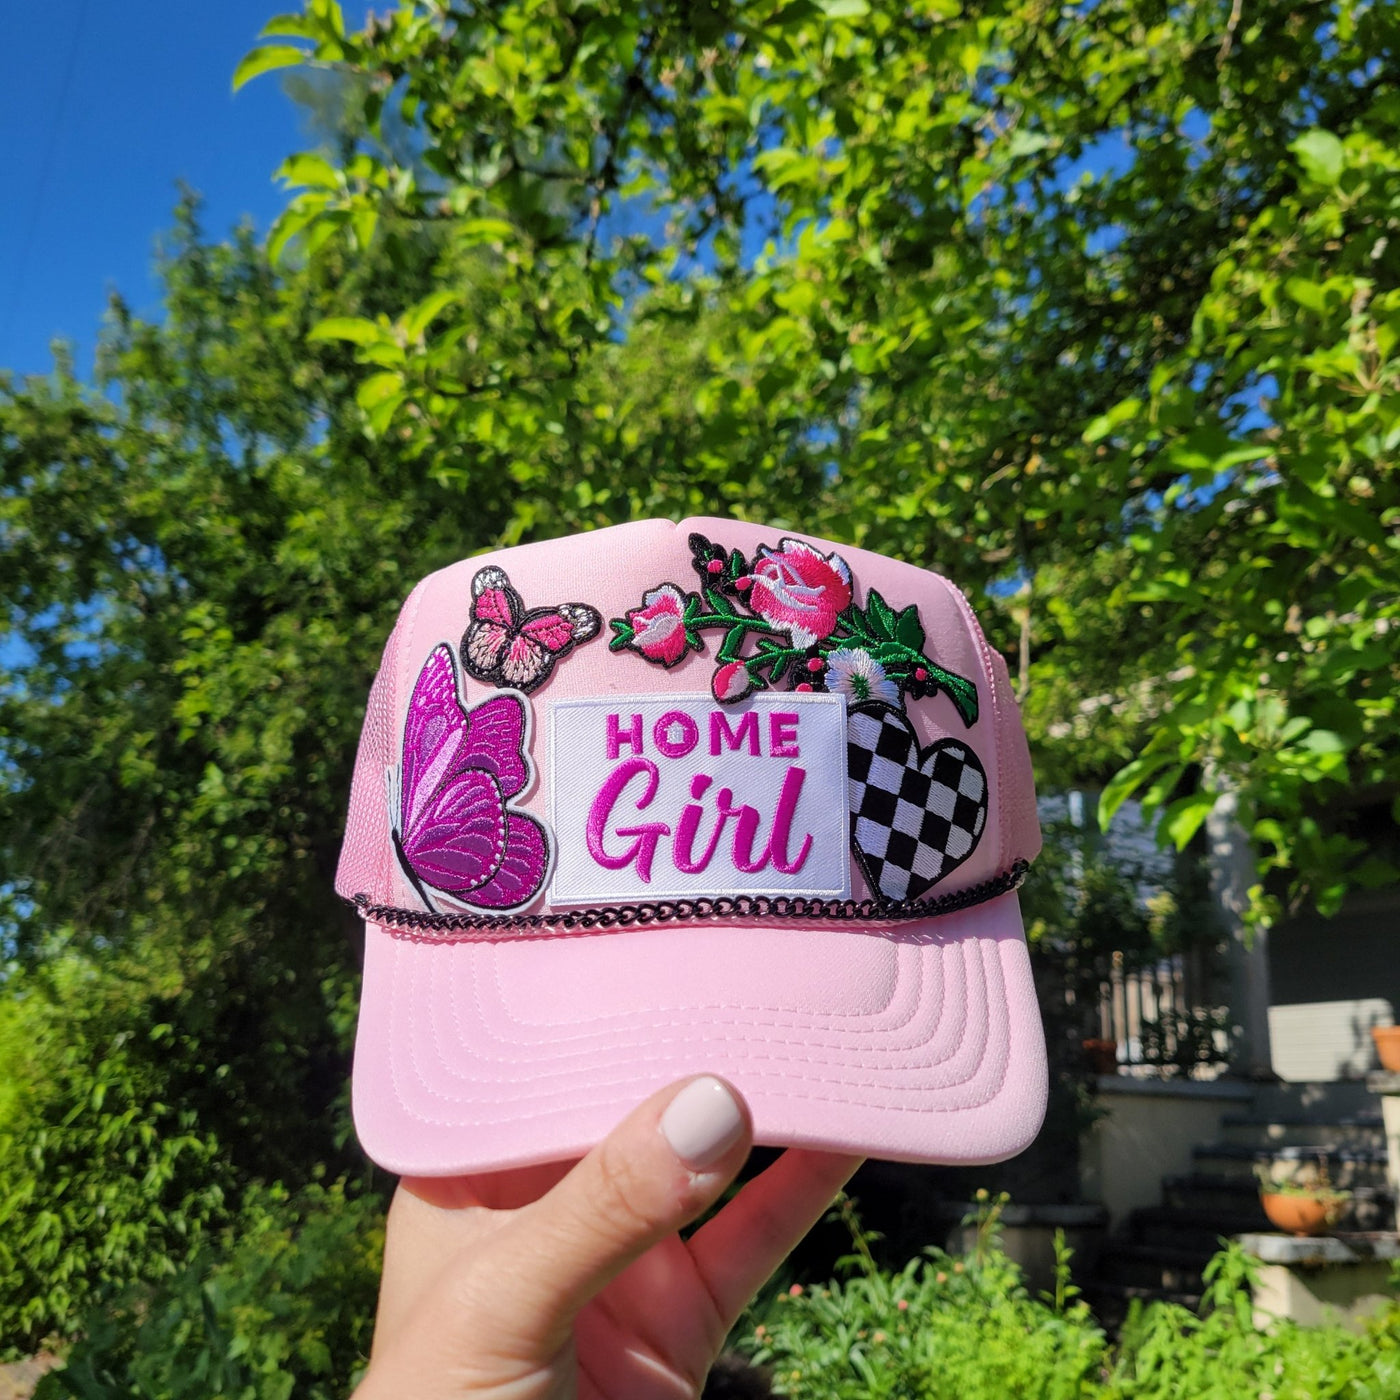 Custom Trucker Patch Hat - All Things Real Estate